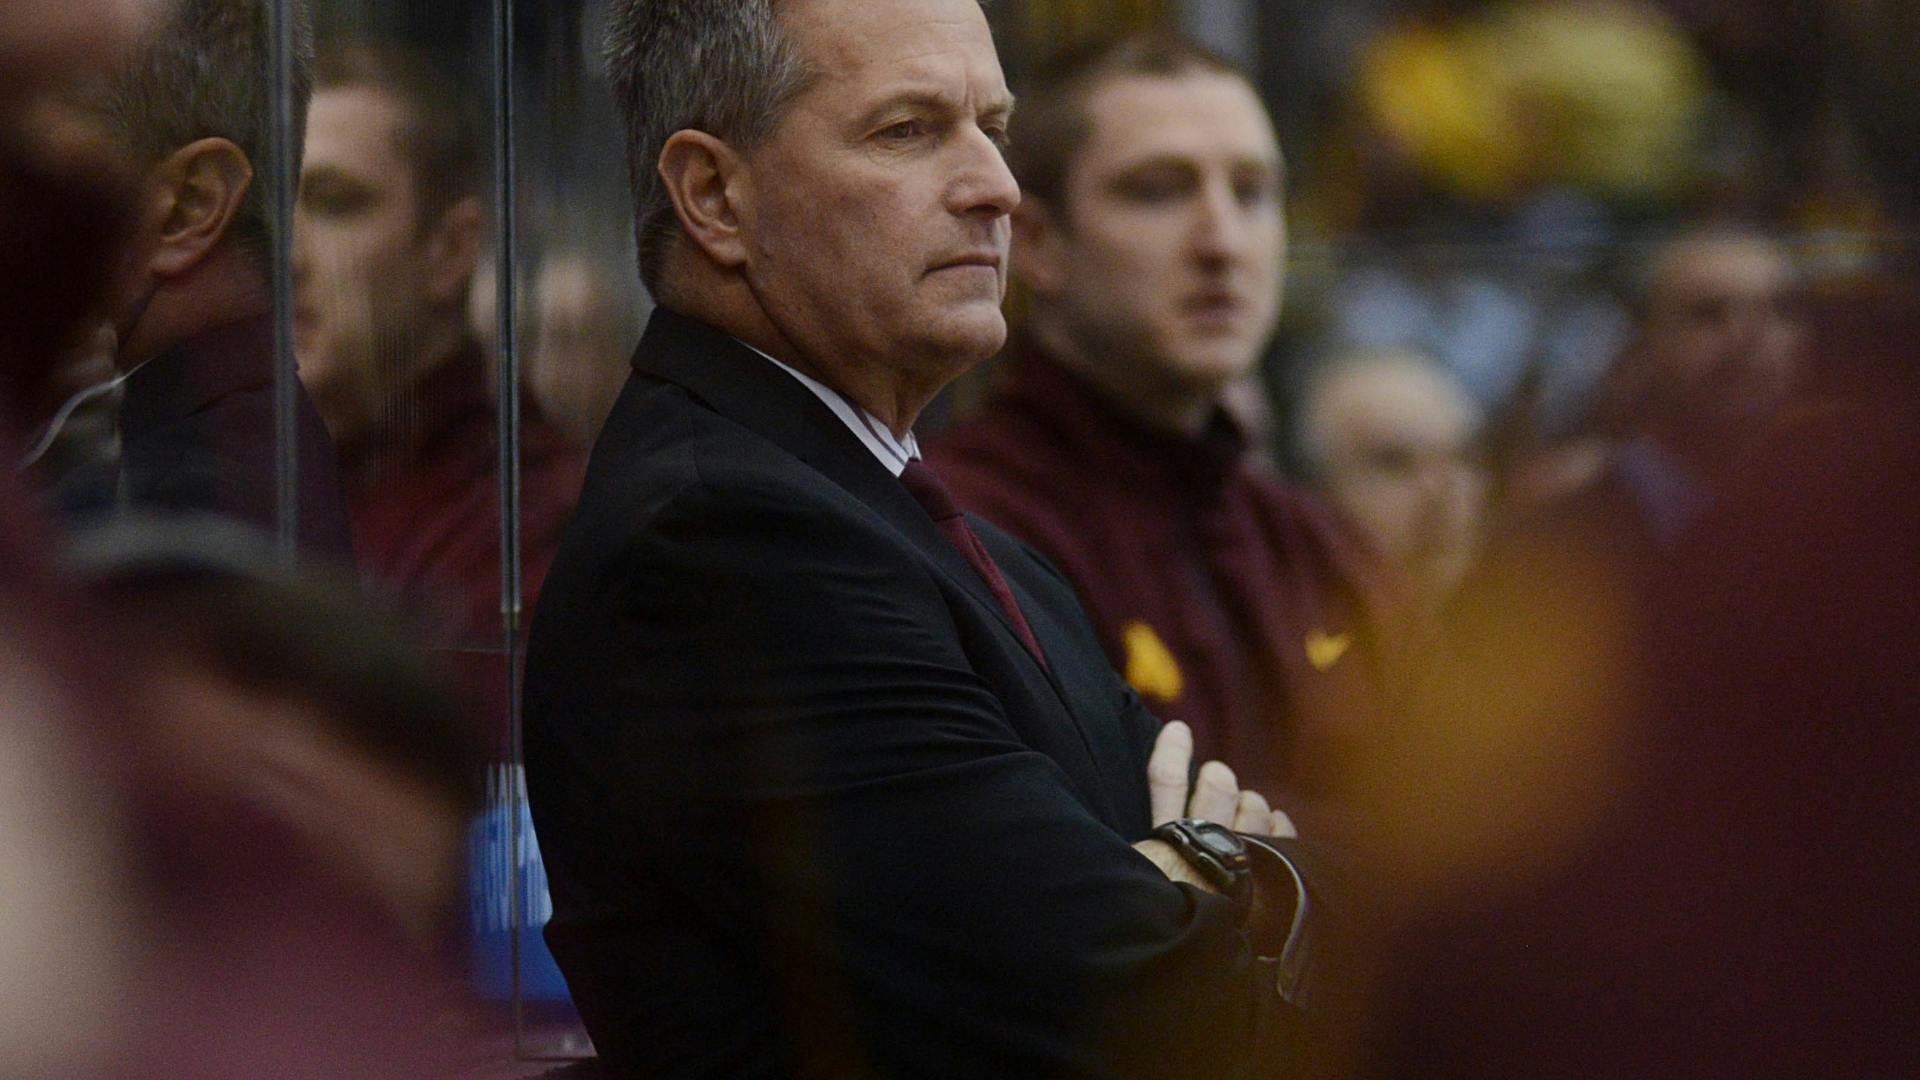 Gophers coach Don Lucia said Saturday's third-period letdown and eventual 3-2 overtime loss is another learning lesson for his young team.